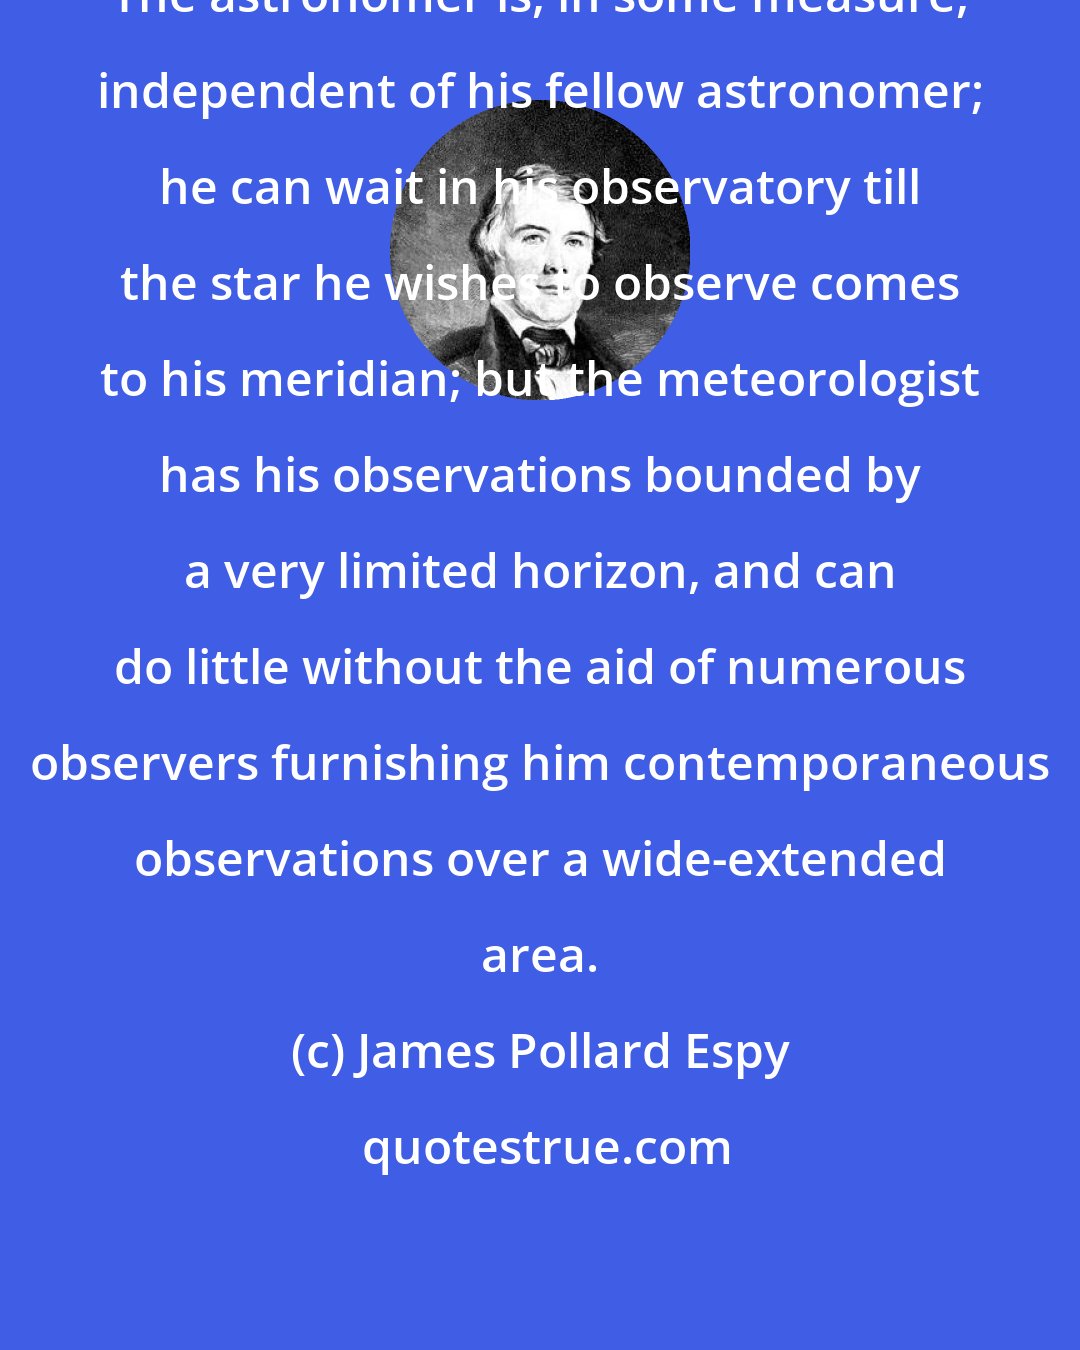 James Pollard Espy: The astronomer is, in some measure, independent of his fellow astronomer; he can wait in his observatory till the star he wishes to observe comes to his meridian; but the meteorologist has his observations bounded by a very limited horizon, and can do little without the aid of numerous observers furnishing him contemporaneous observations over a wide-extended area.